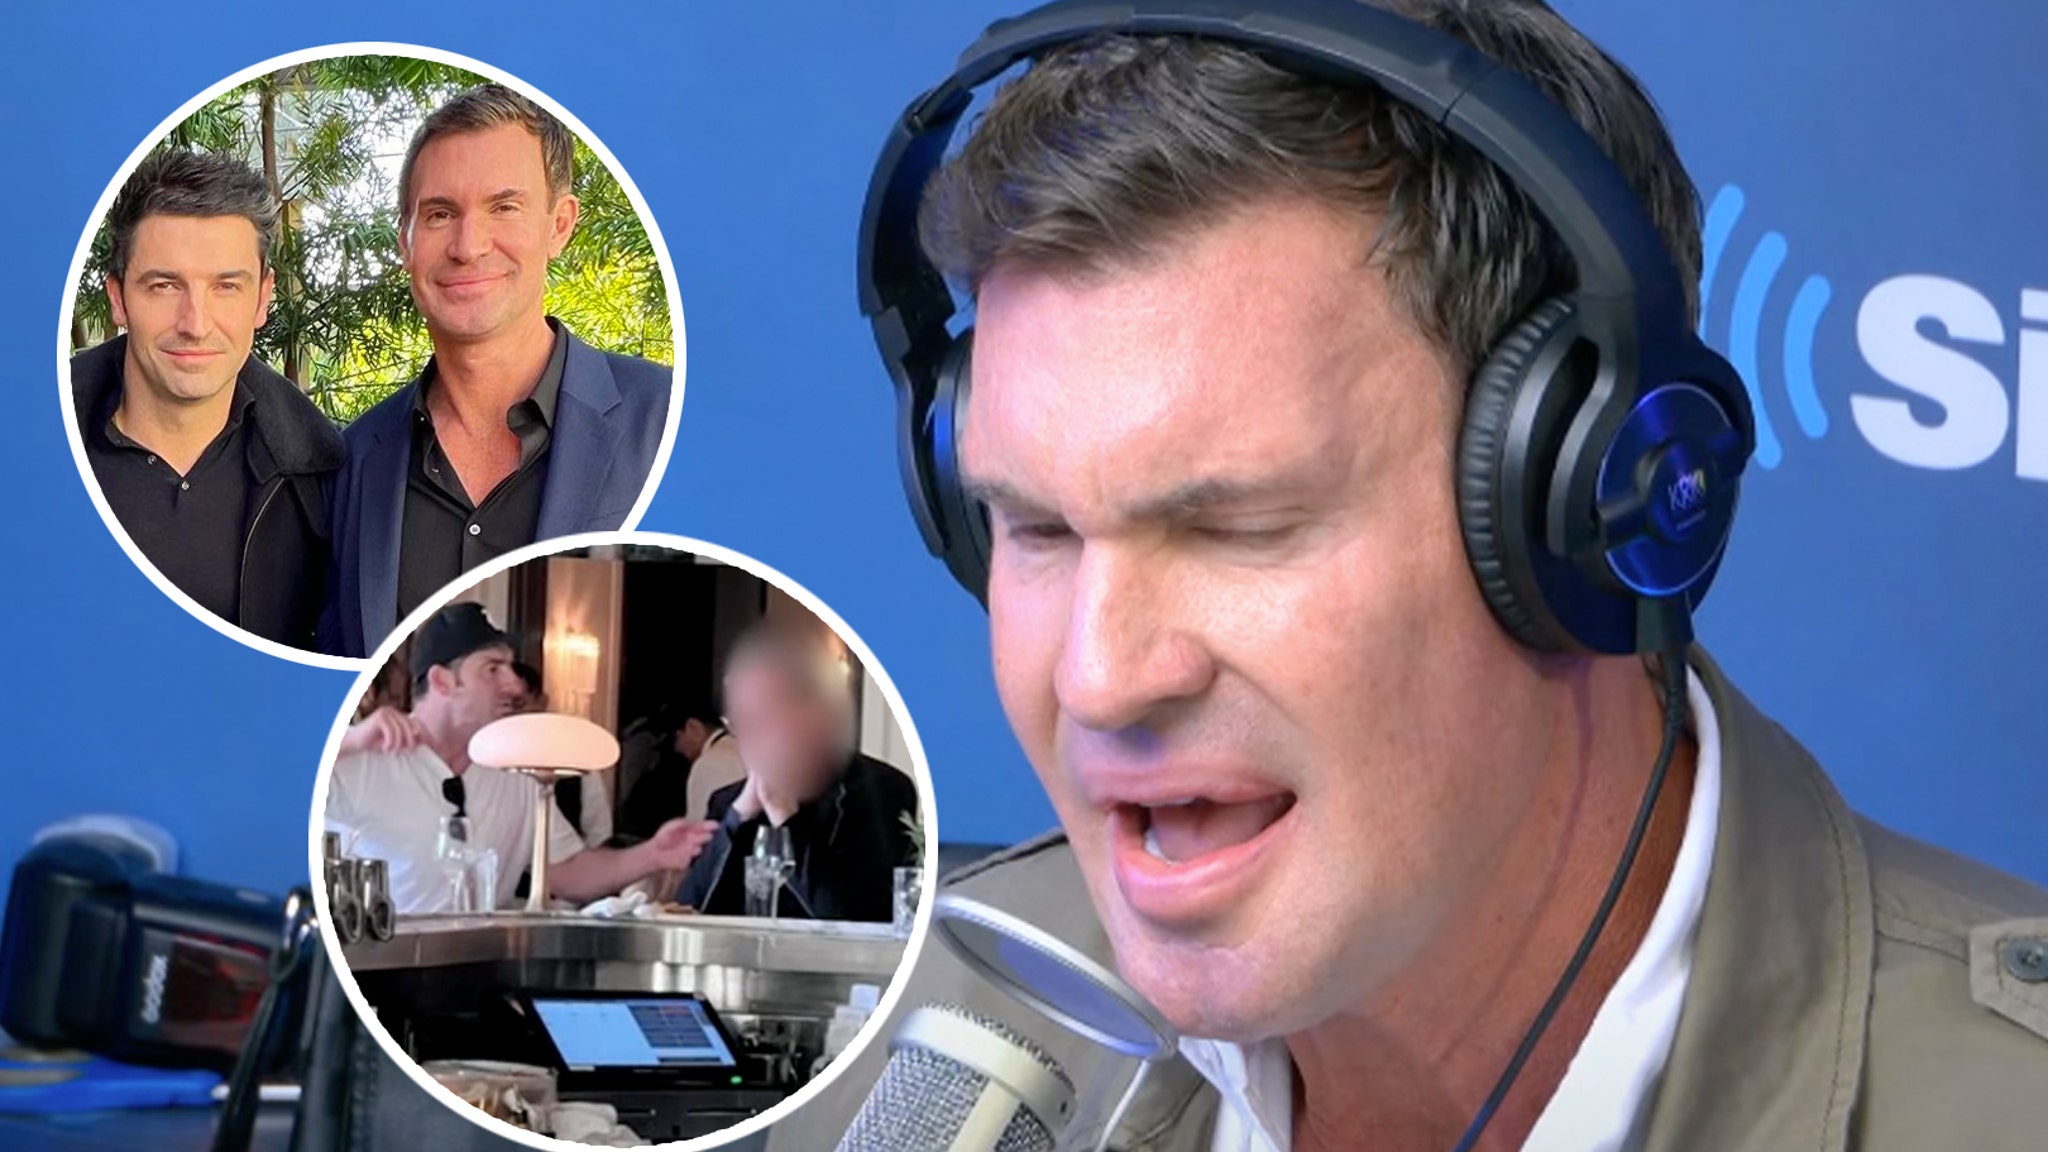 Jeff Lewis and Boyfriend Stuart O'Keefe Hash Out Messy Relationship Drama Live on His Radio Show